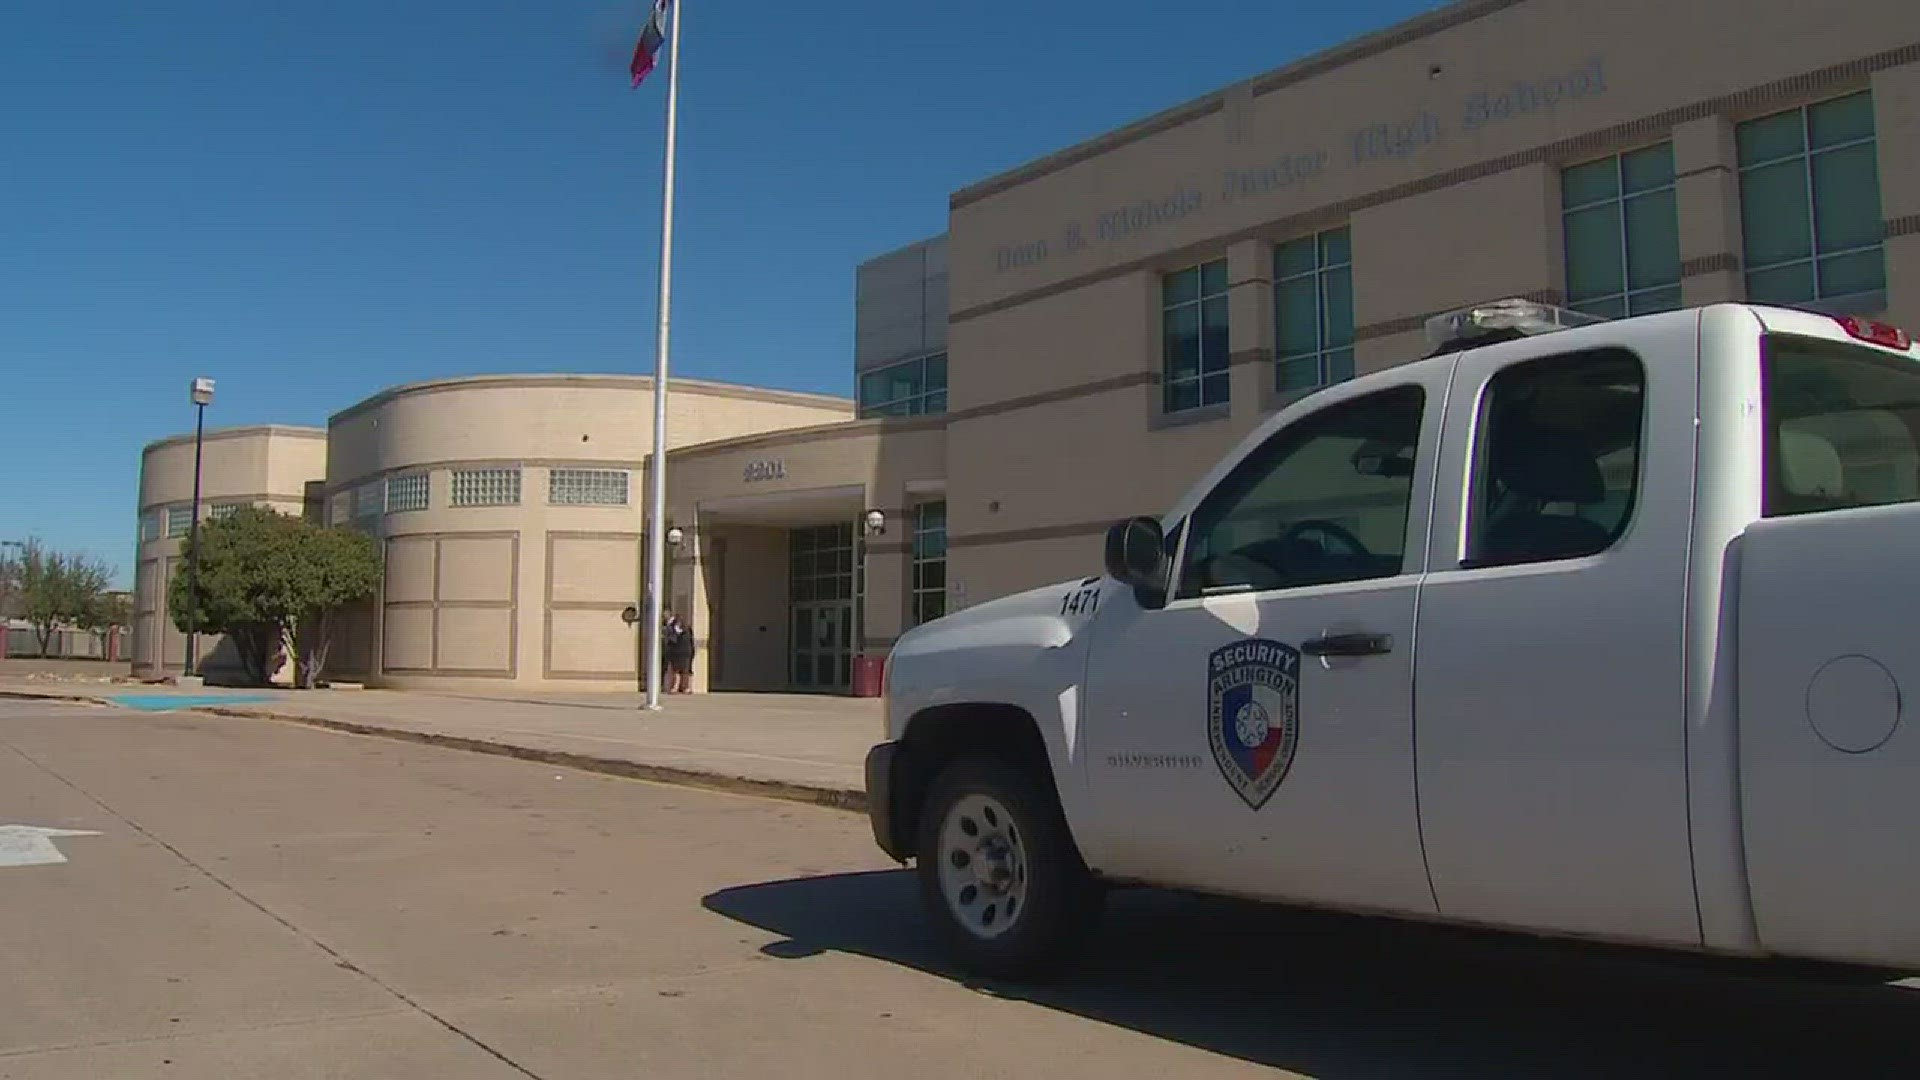 WFAA investigative reporter Charlotte Huffman has the latest on claims of a mystery illness at Arlington ISD's Nichols Junior High School.